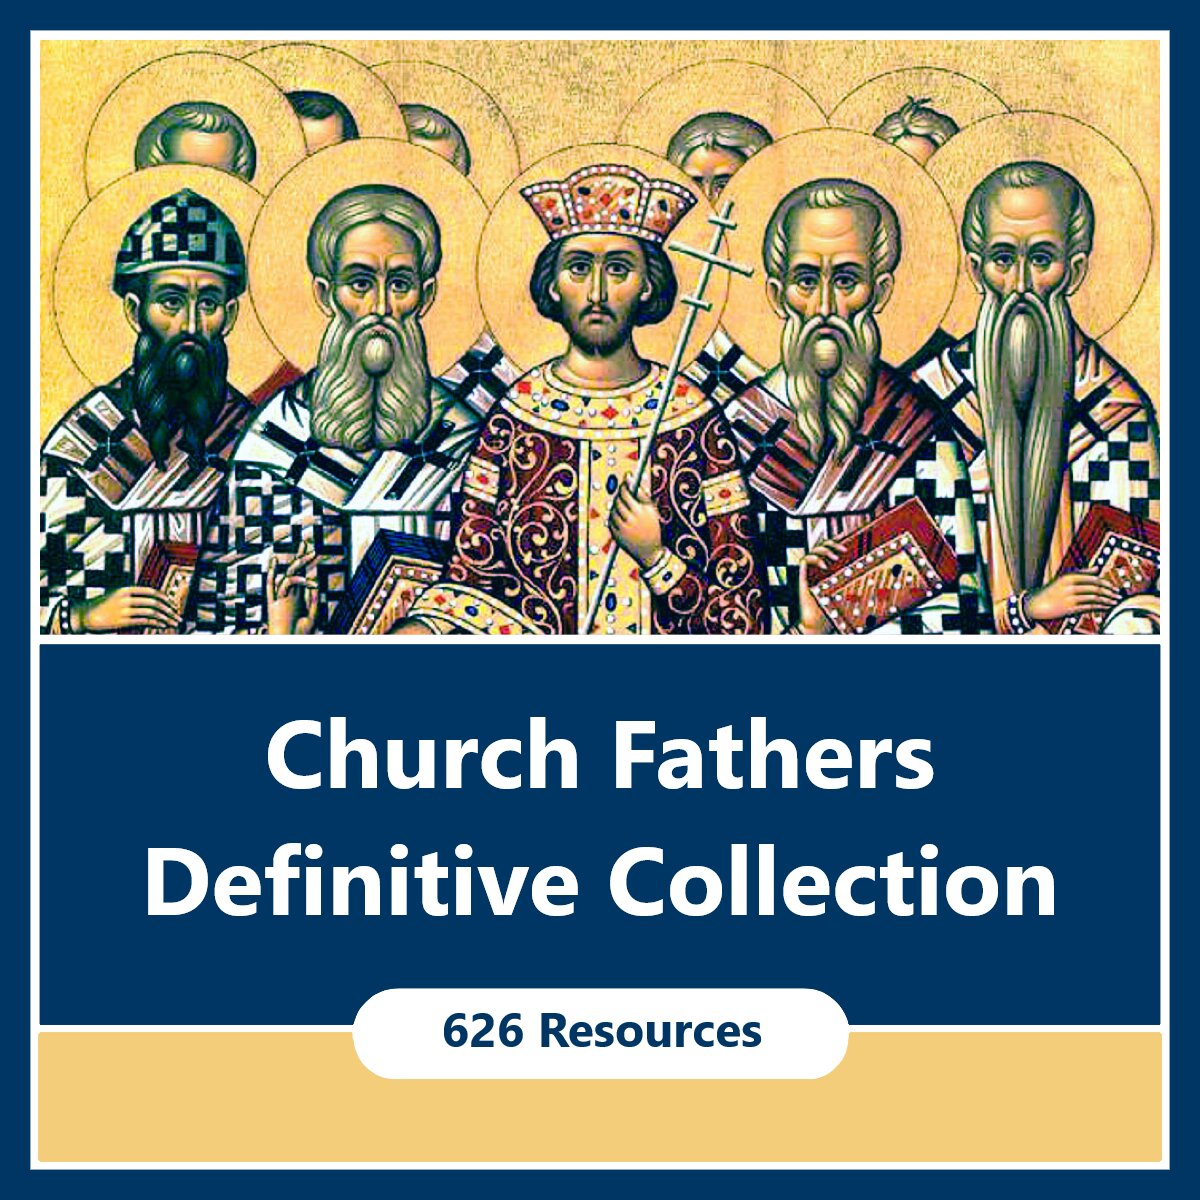 Church Fathers Definitive Collection (626 Resources)